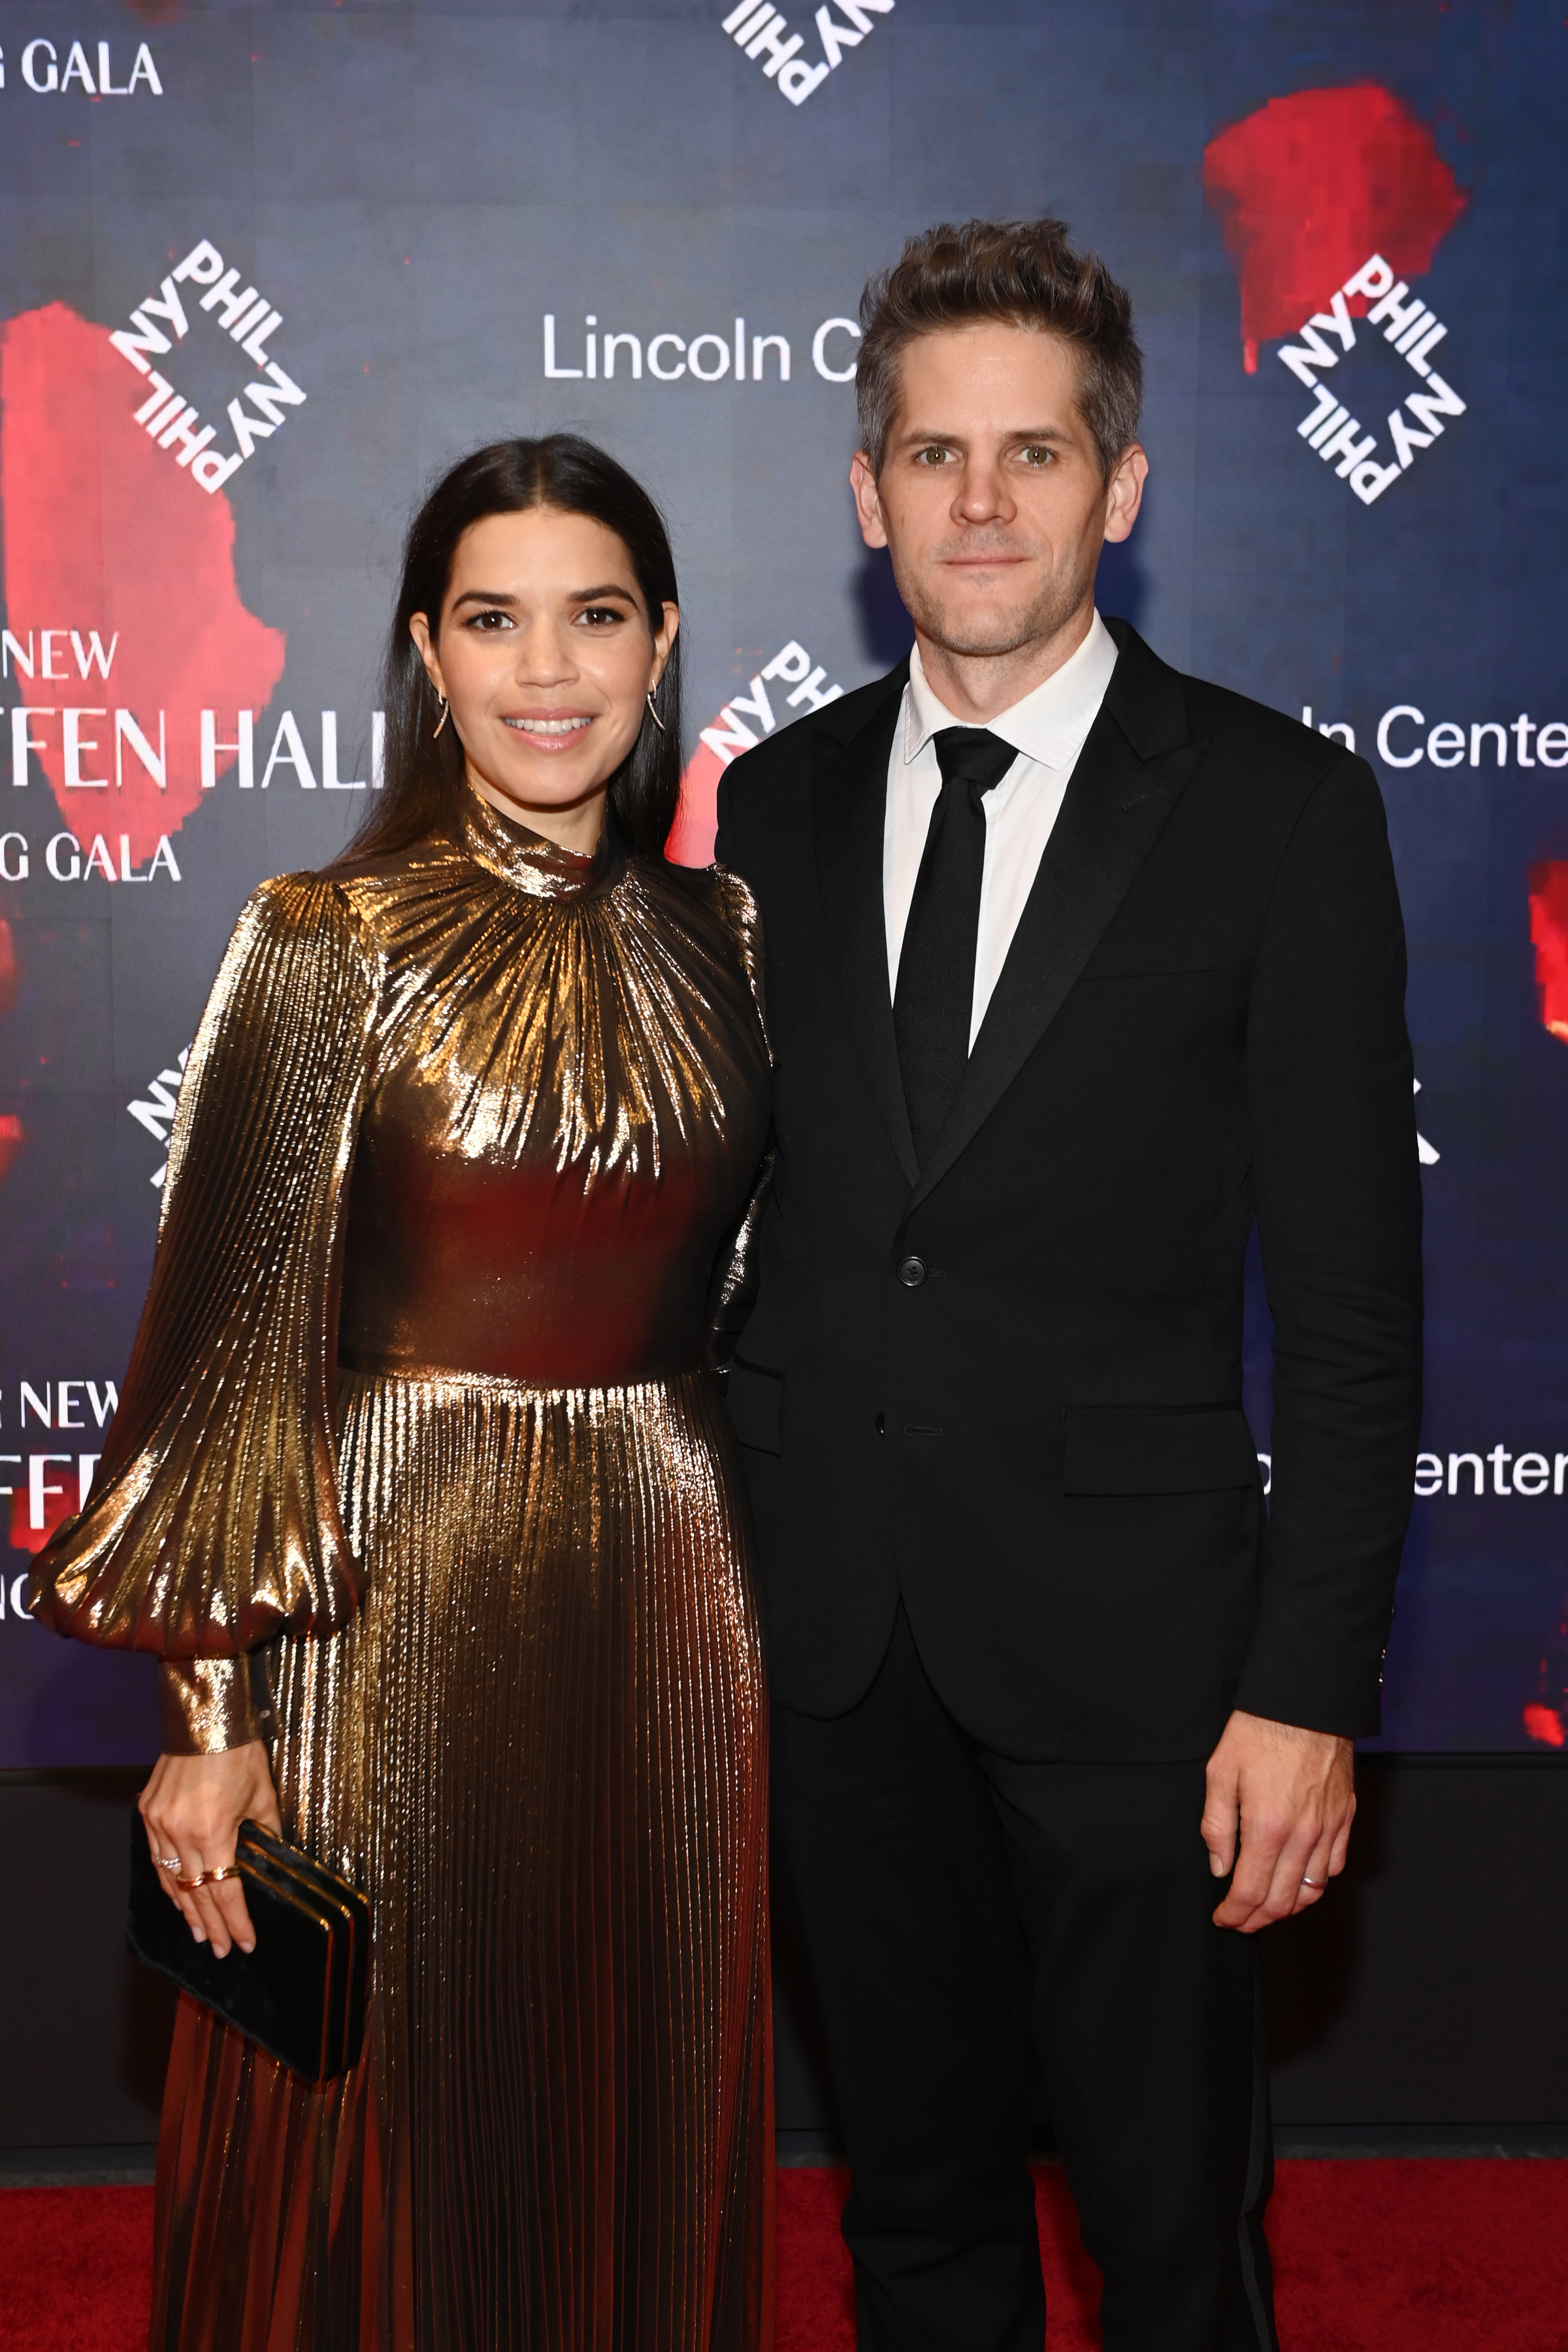 America Ferrera and Ryan Piers Williams are pictured as Lincoln Center and New York Philharmonic celebrate the opening of the new David Geffen Hall with a Gala Concert & Dinner on October 26, 2022, in New York City | Source: Getty Images